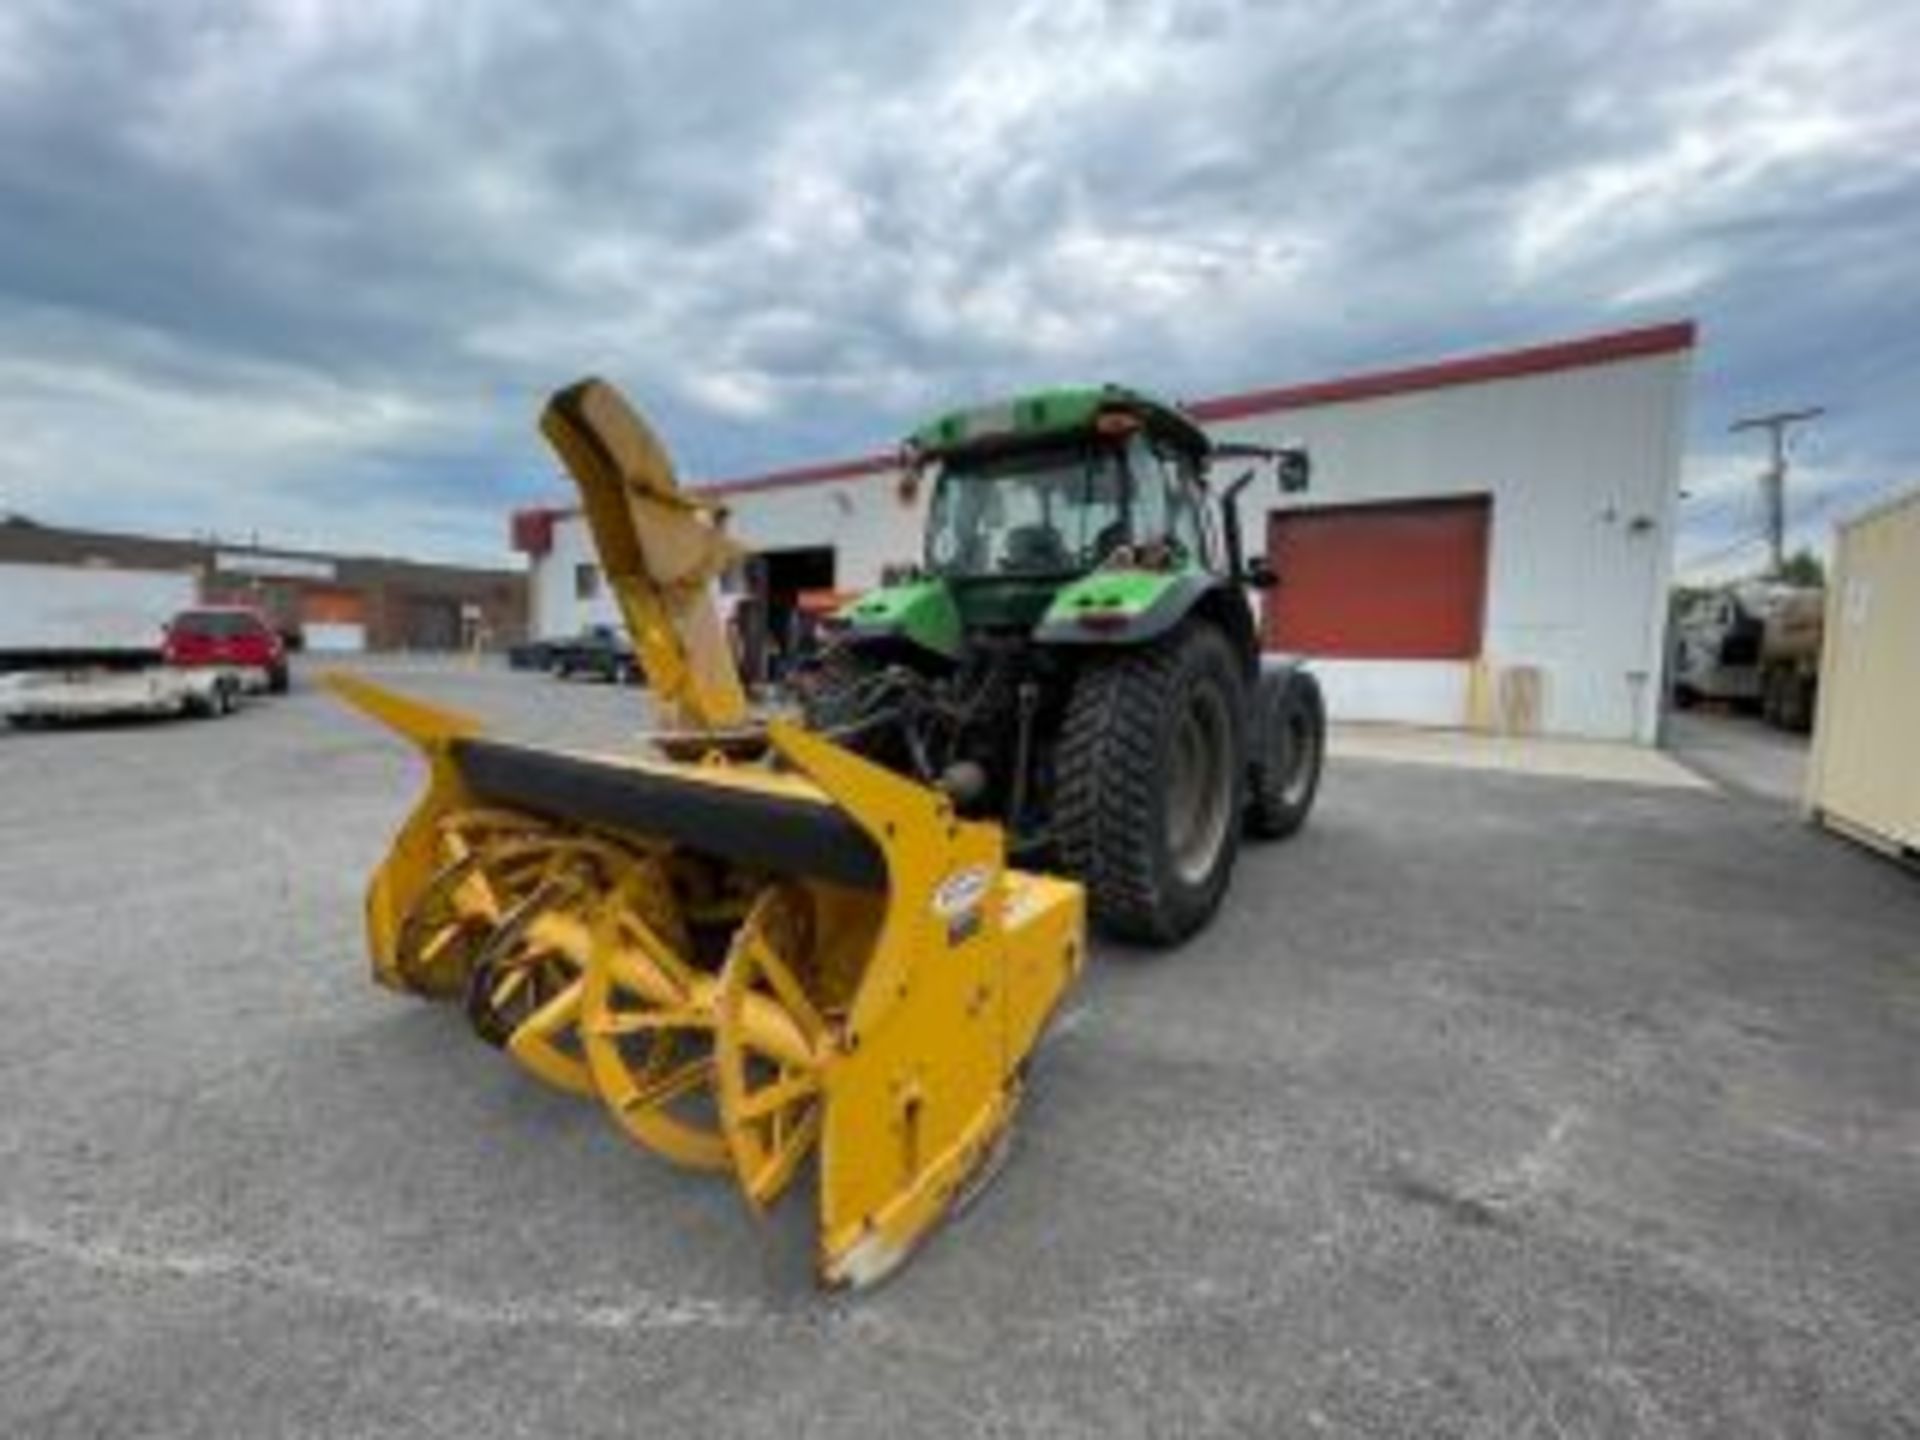 2018 DEUTZ-FAHR agricultural tractor # T51-10003 With PRONOVOST snow removal attachment 1109.8 Hours - Image 8 of 27